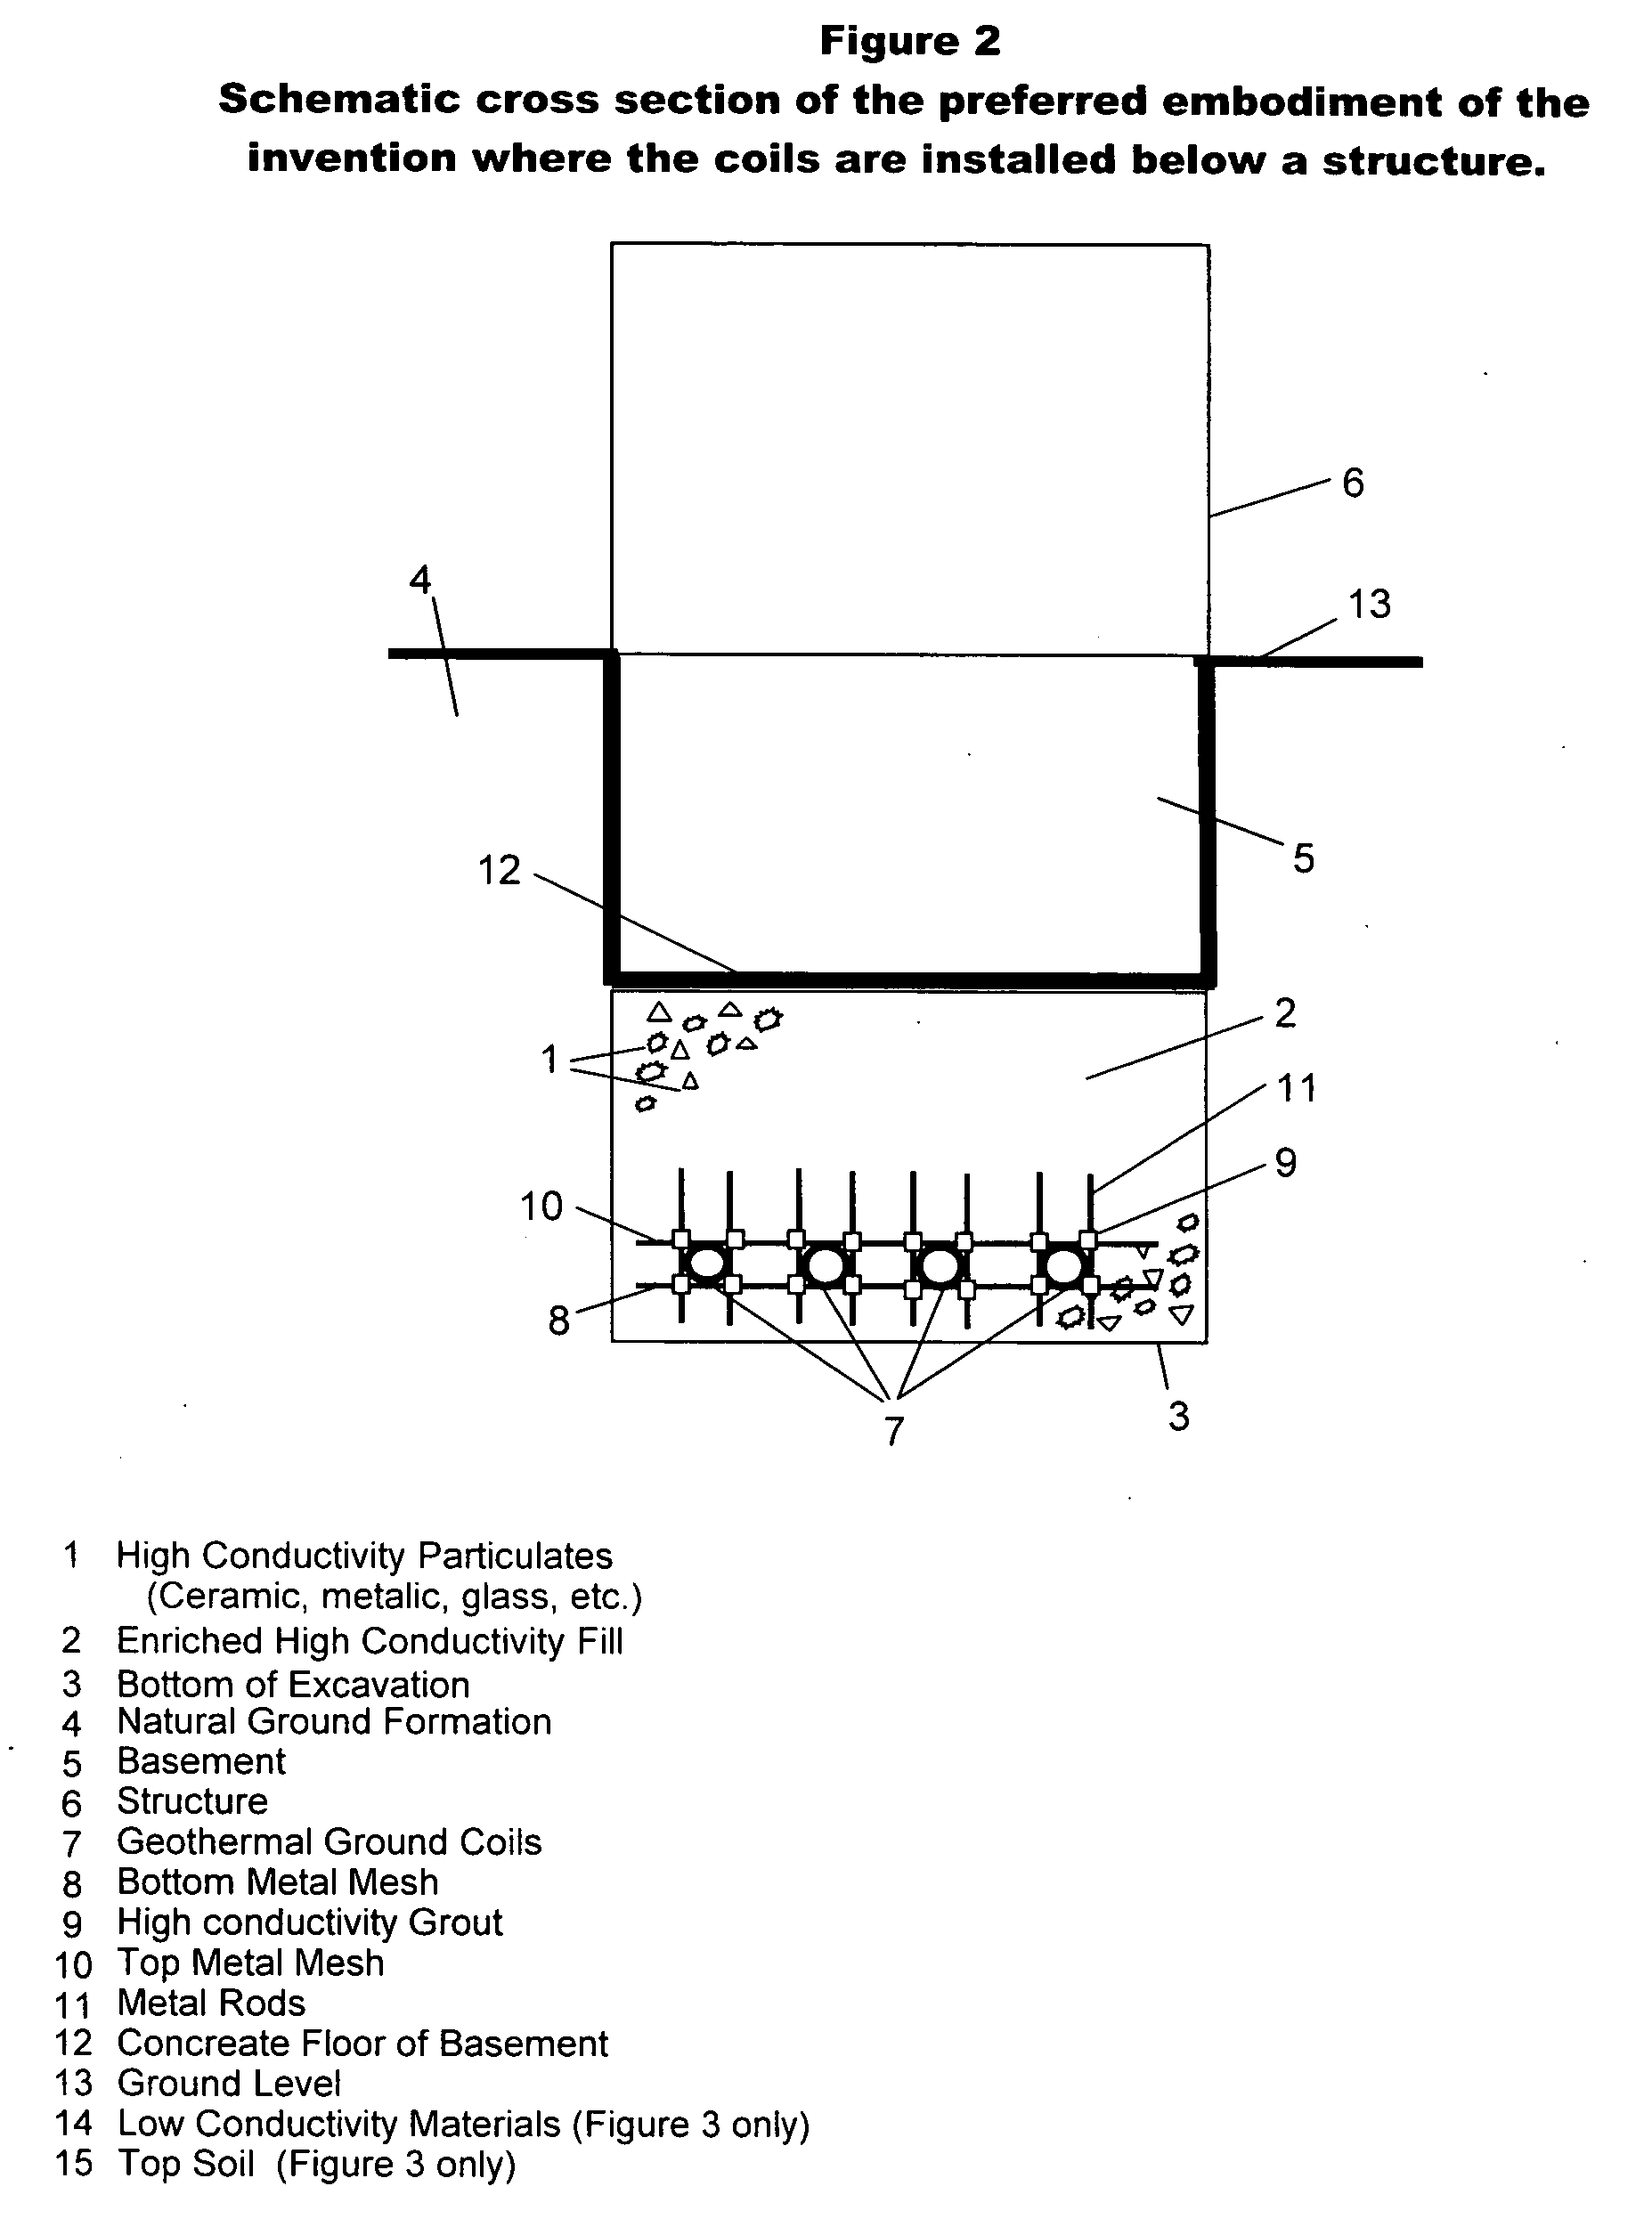 Enriched high conductivity geothermal fill and method for installation